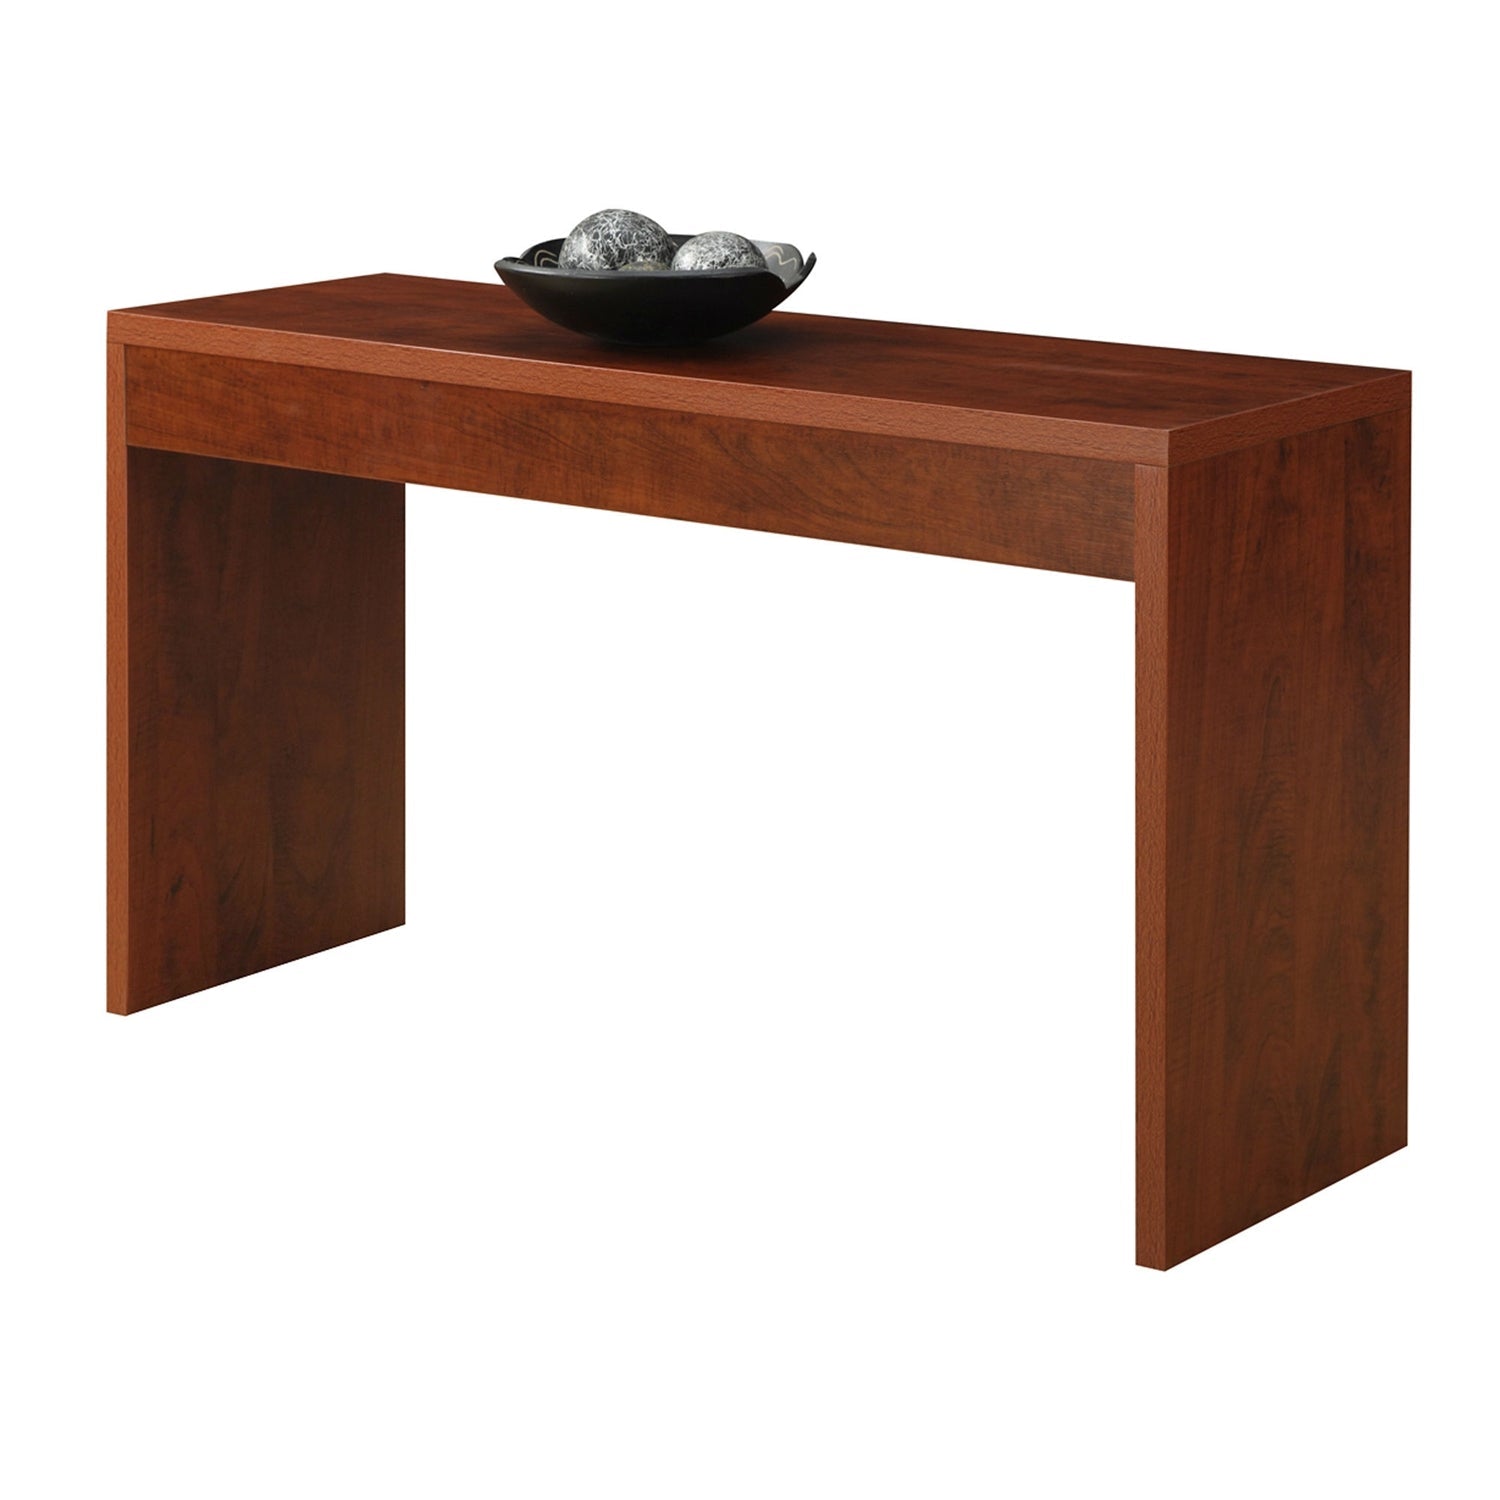 Living Room > Console & Sofa Tables - Cherry Finish Sofa Table Modern Living Room Console Table